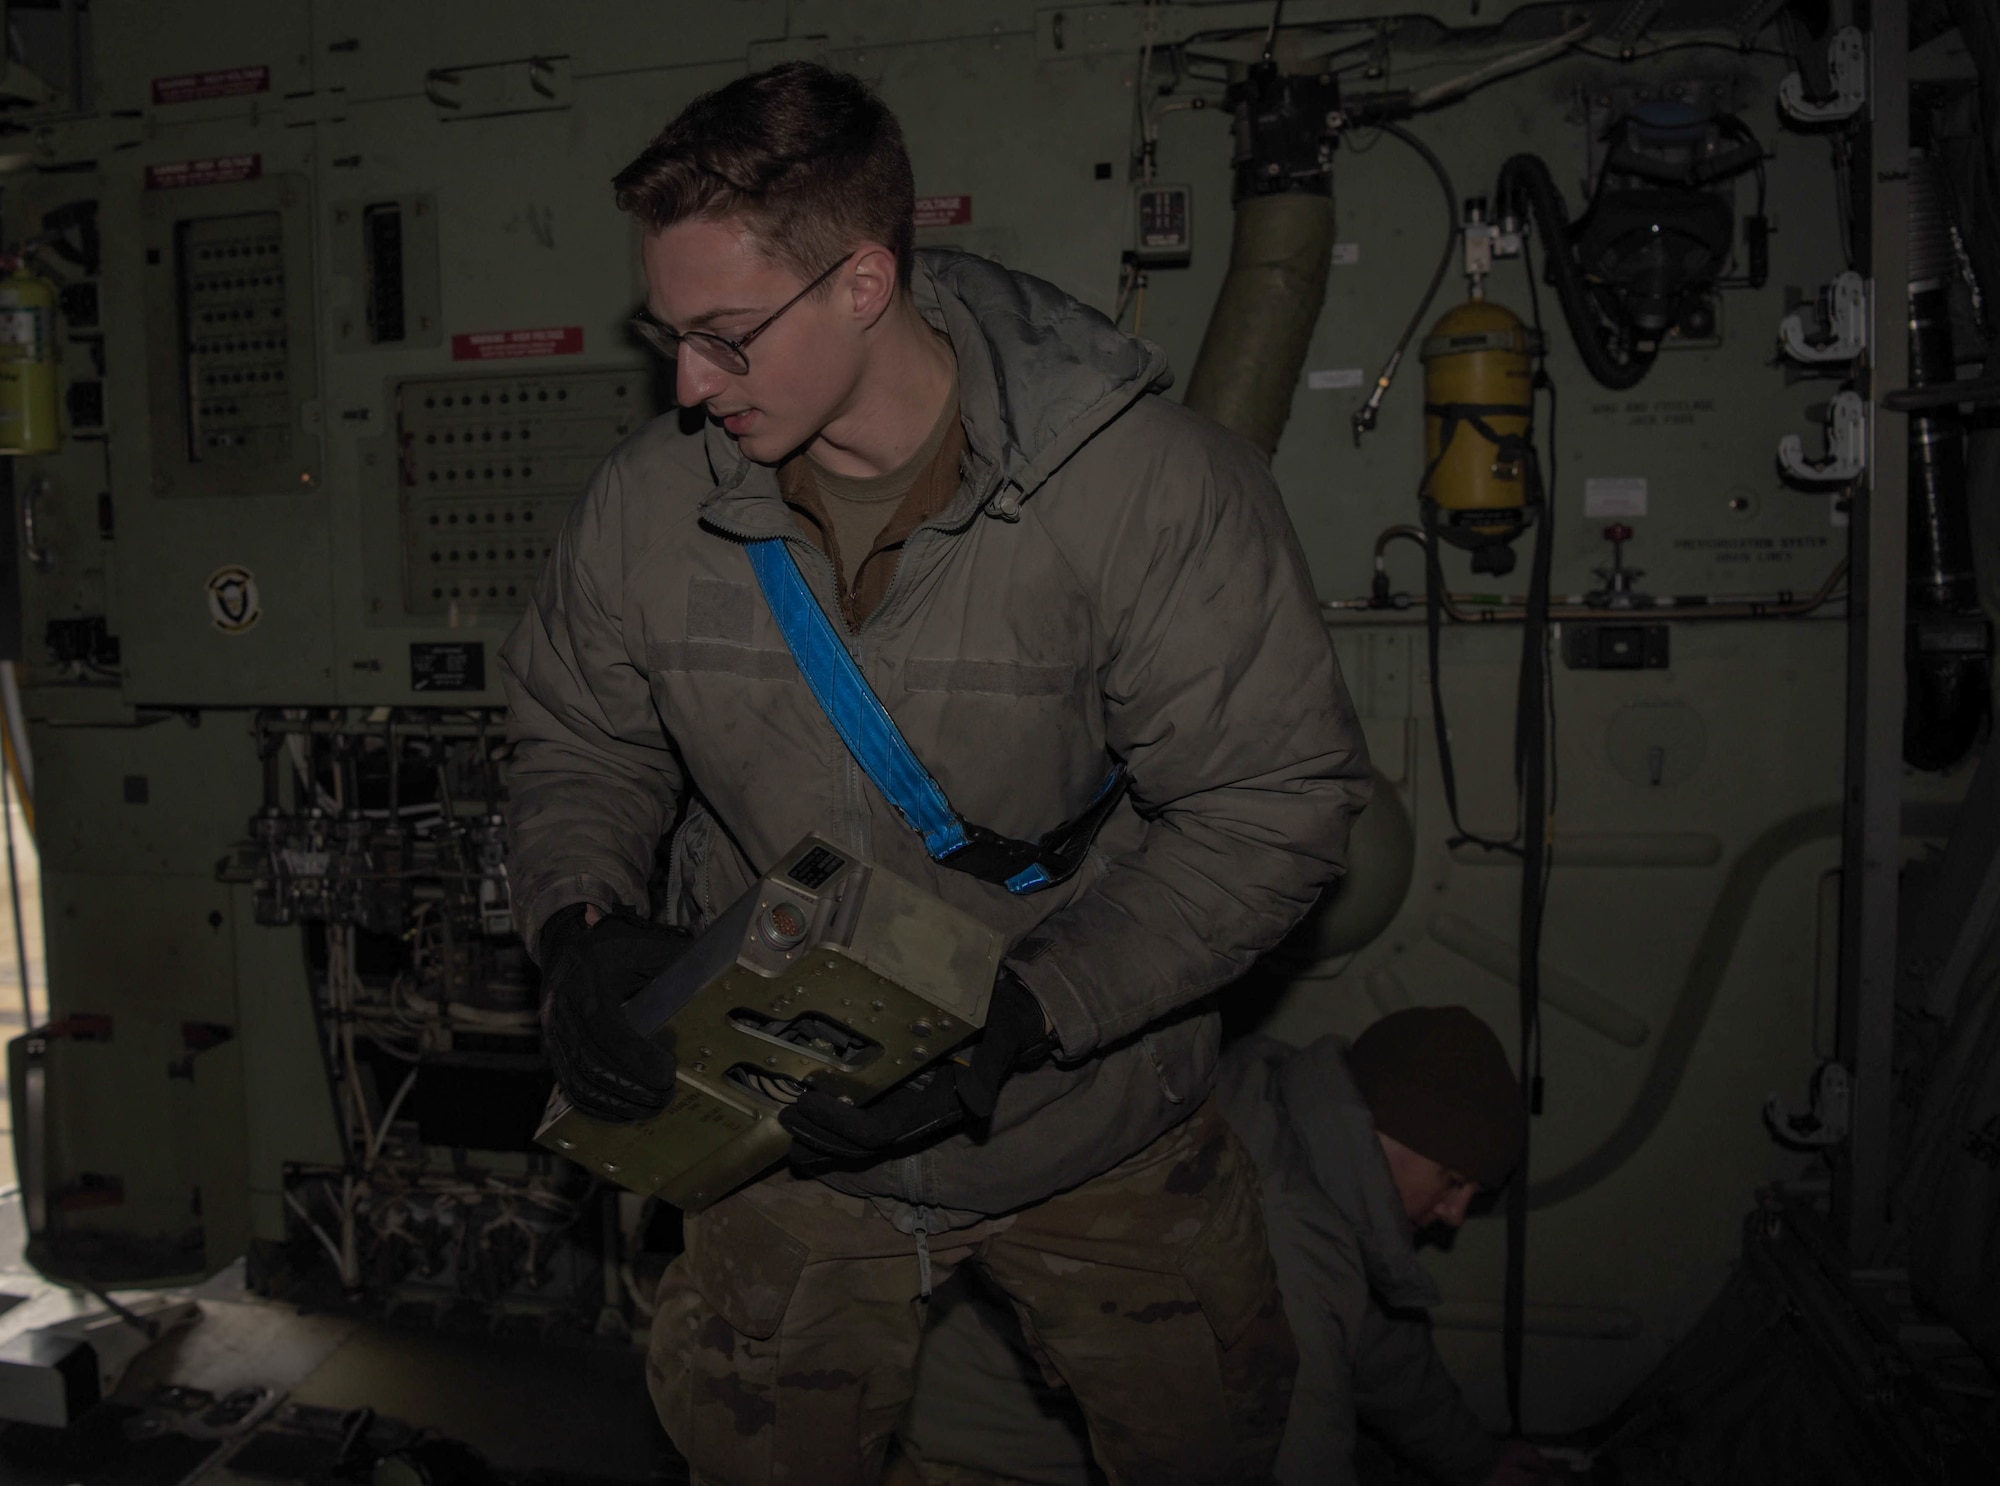 Airman moves equipment on aircraft.